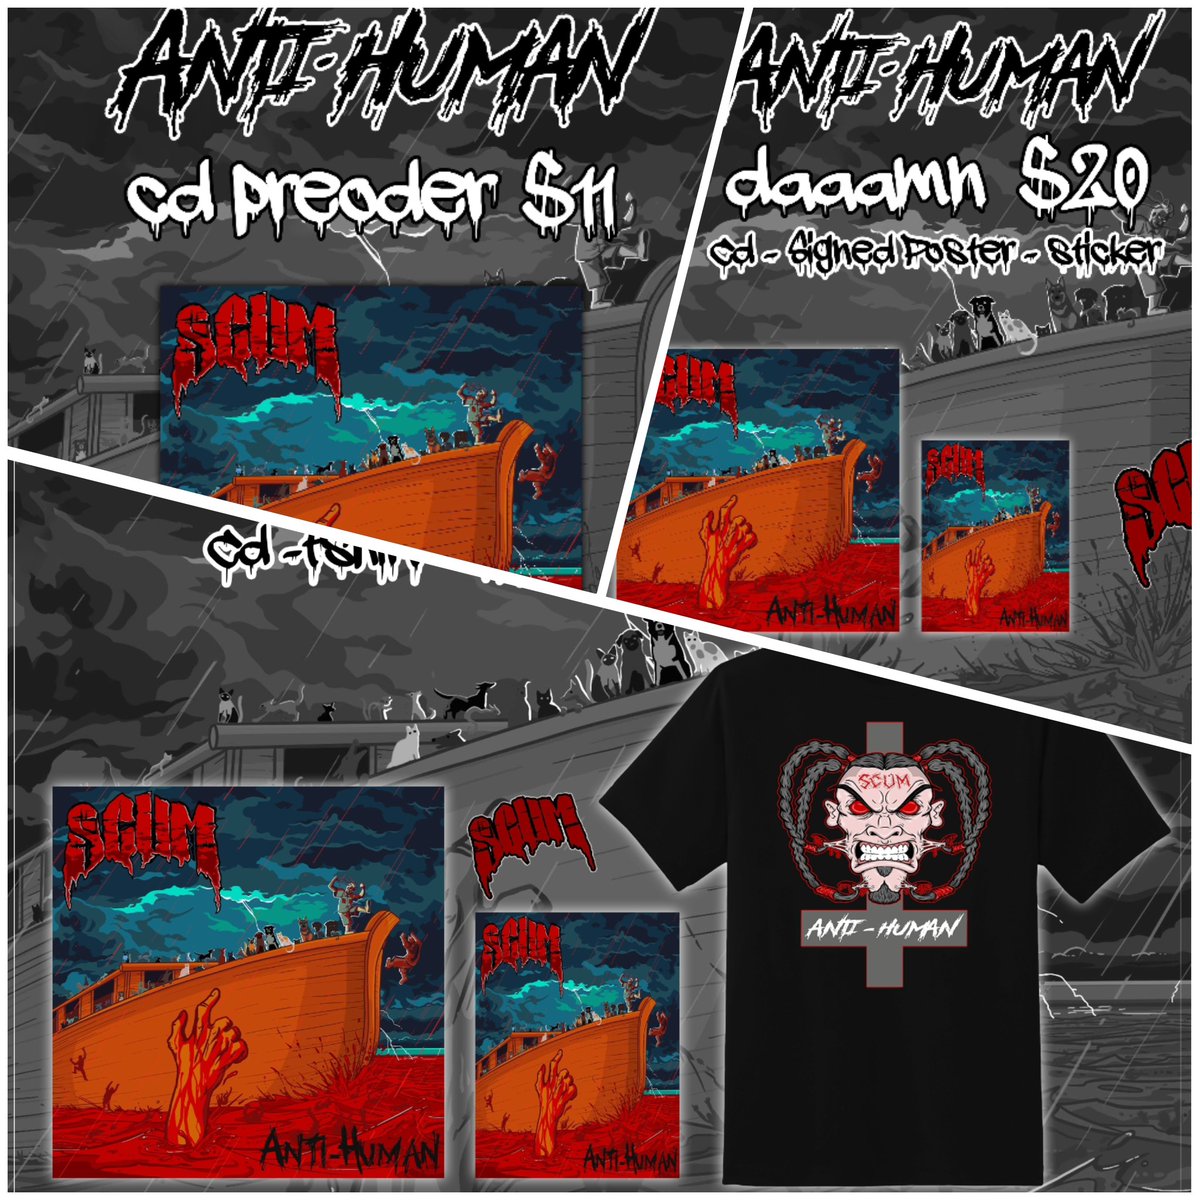 And it's time...ANTI-HUMAN pre-orders are live...orders ship on or before 4/26...that new 15 songs SCUM gorehop saga is about to be unleashed on eager (or not-so-eager and hella salty) eardrums! #LSP #Scum #Gorehop #Antihuman #Horrorcore #NewMusicAlert #NewAlbum #TeamSnuff